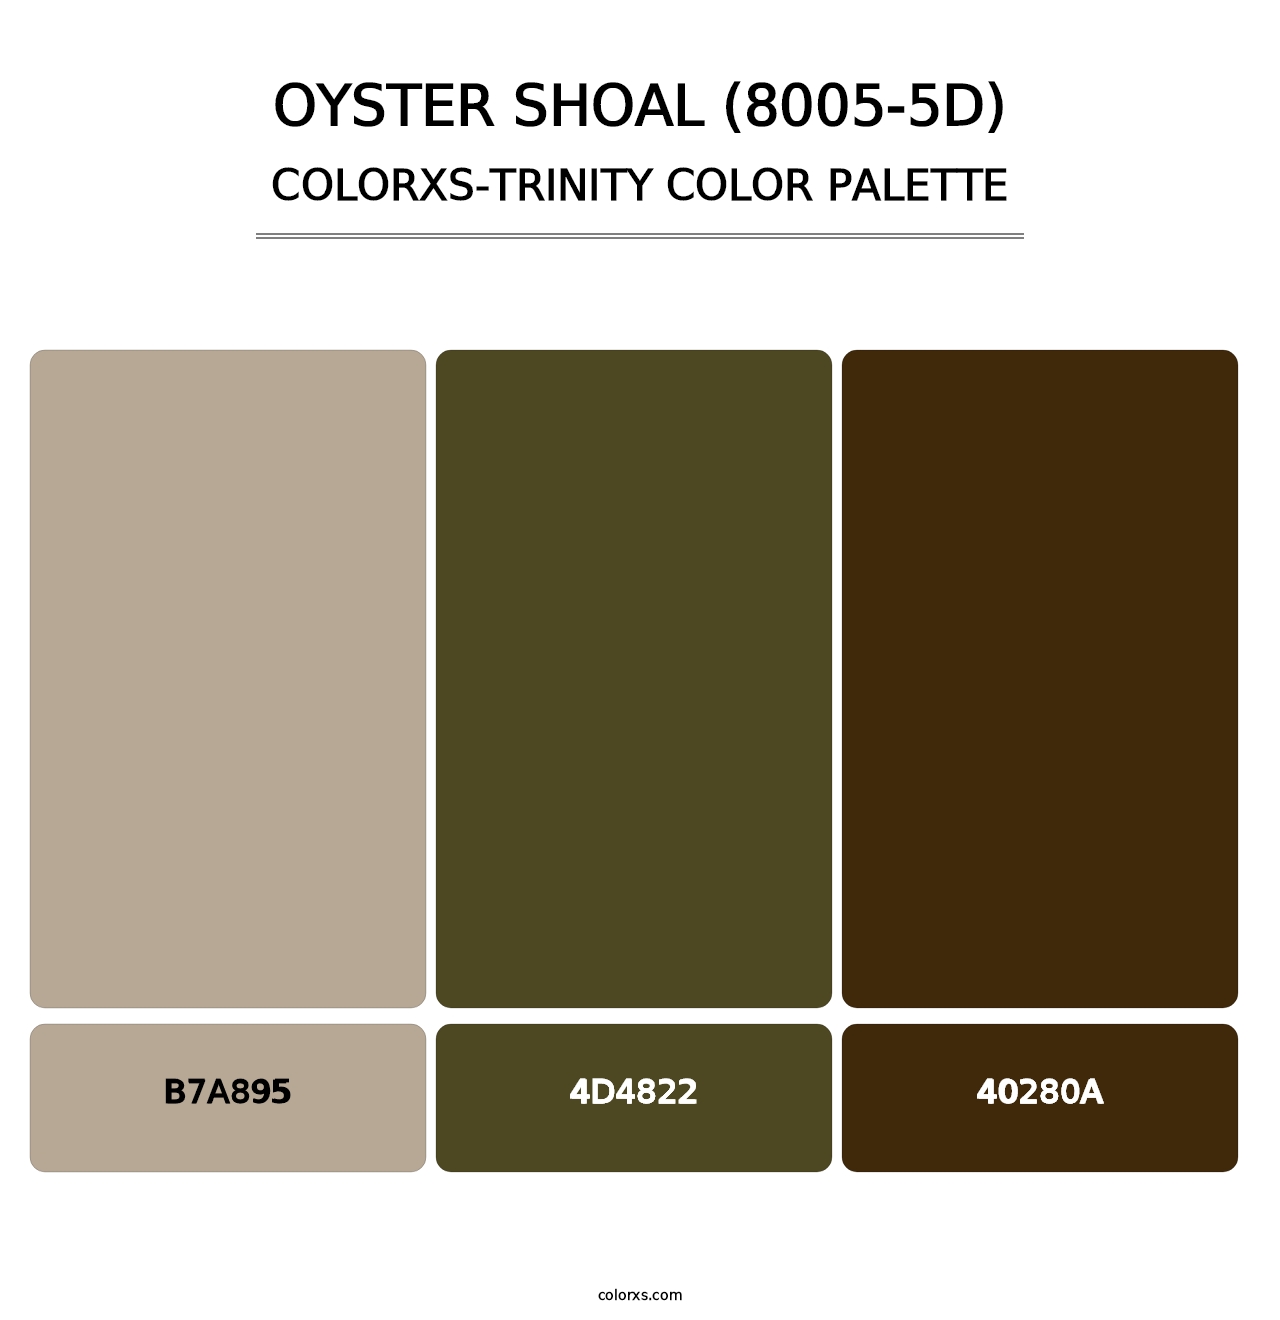 Oyster Shoal (8005-5D) - Colorxs Trinity Palette